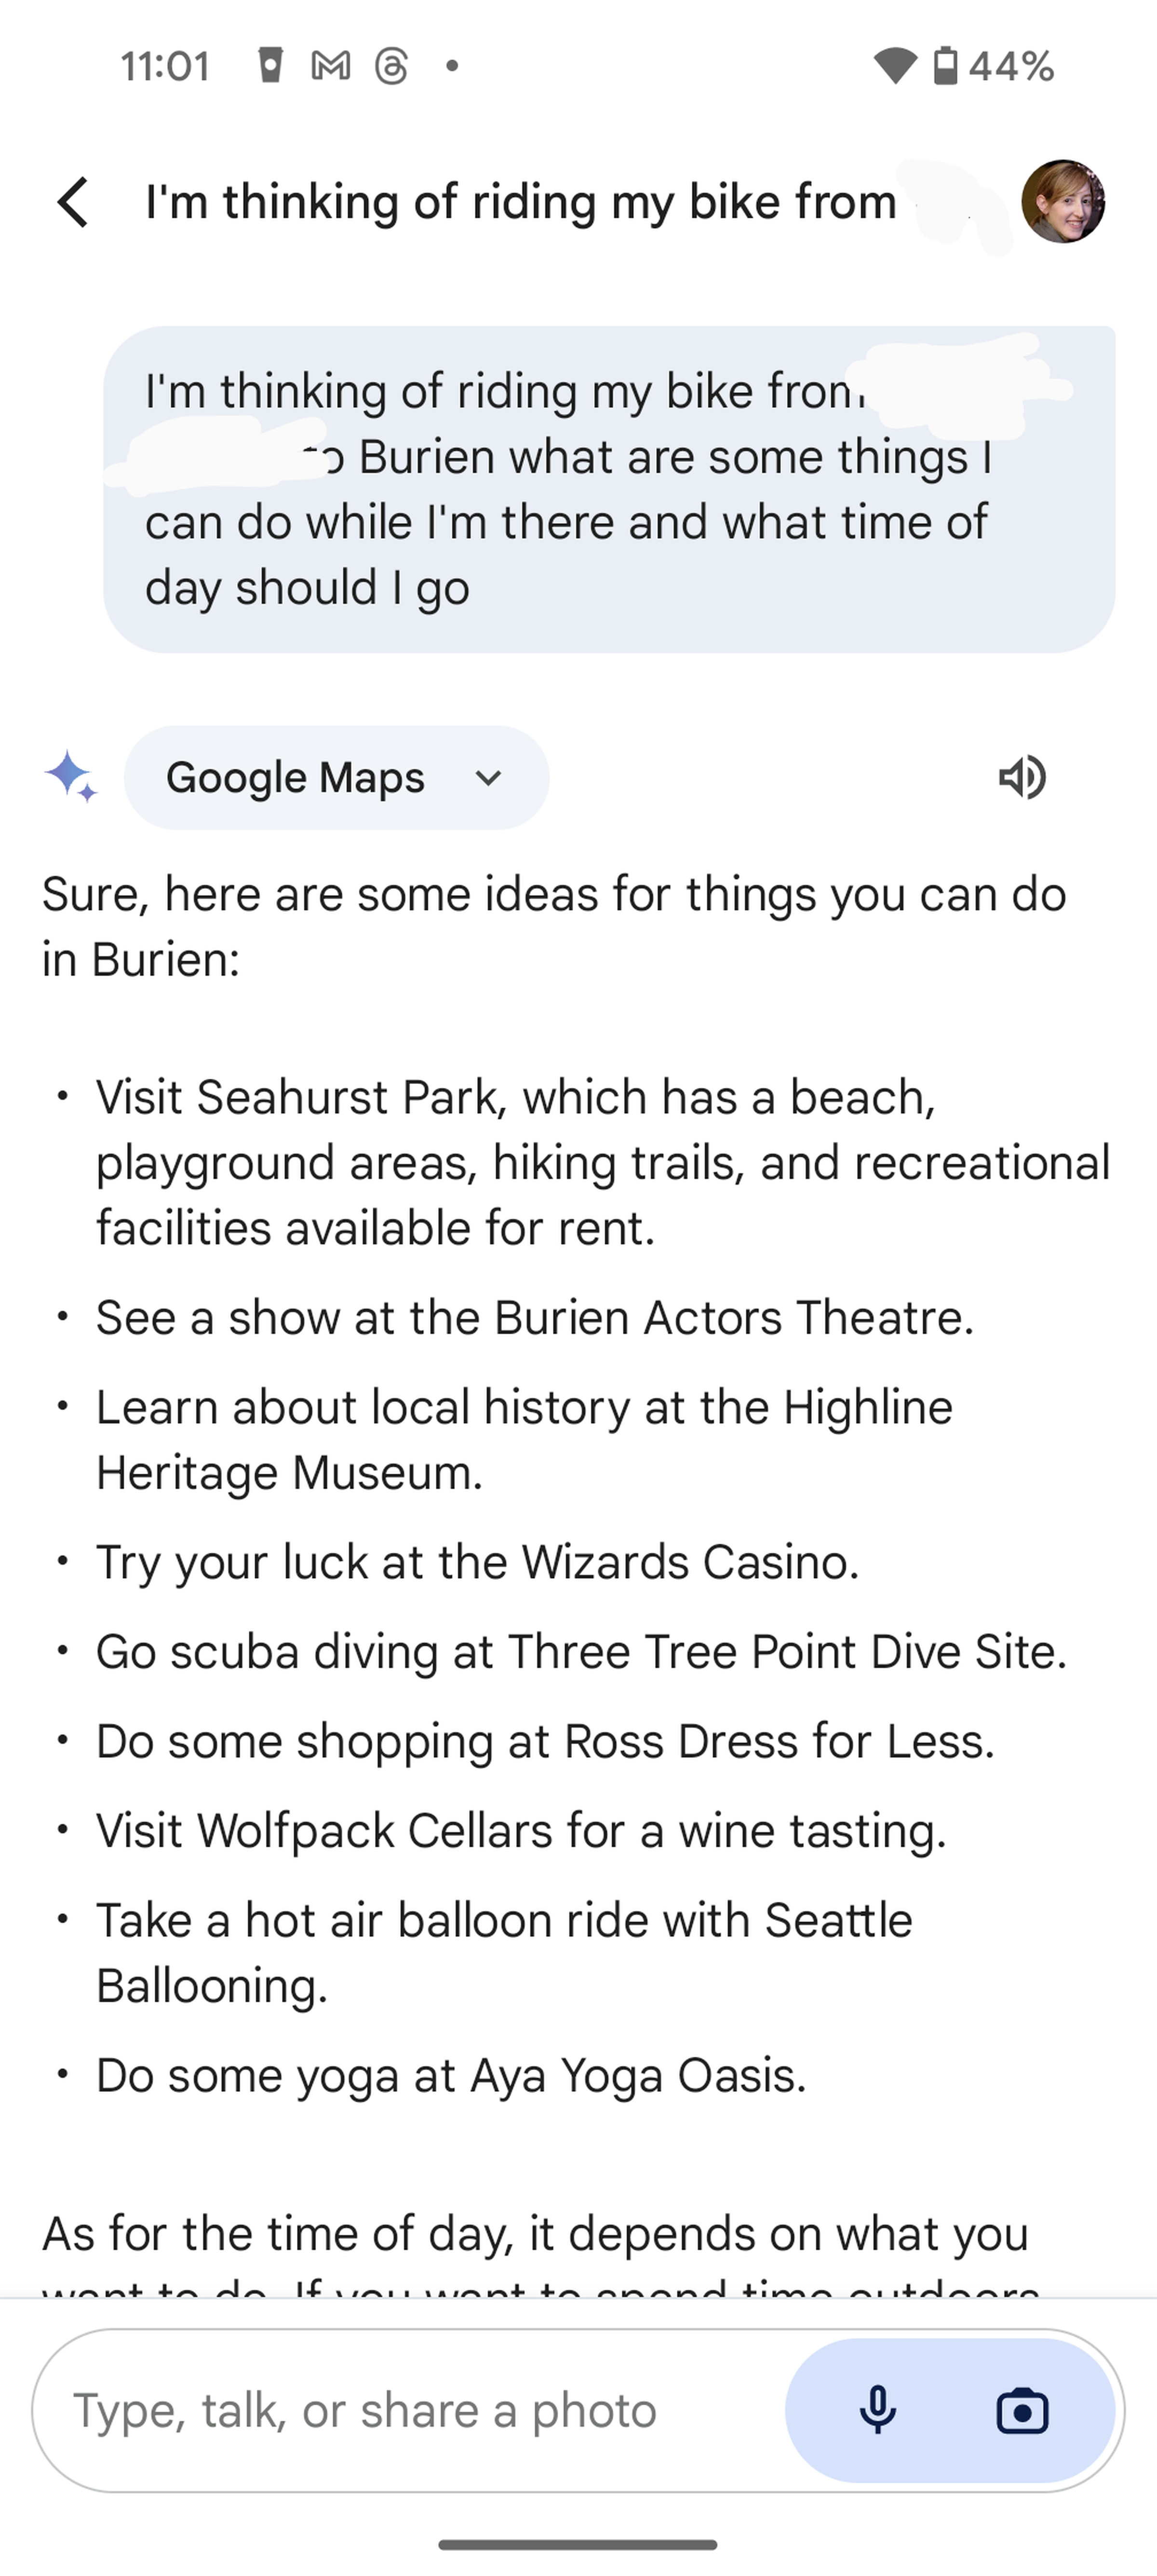 Screenshot showing a list of suggested activities for a neighborhood outside of Seattle.